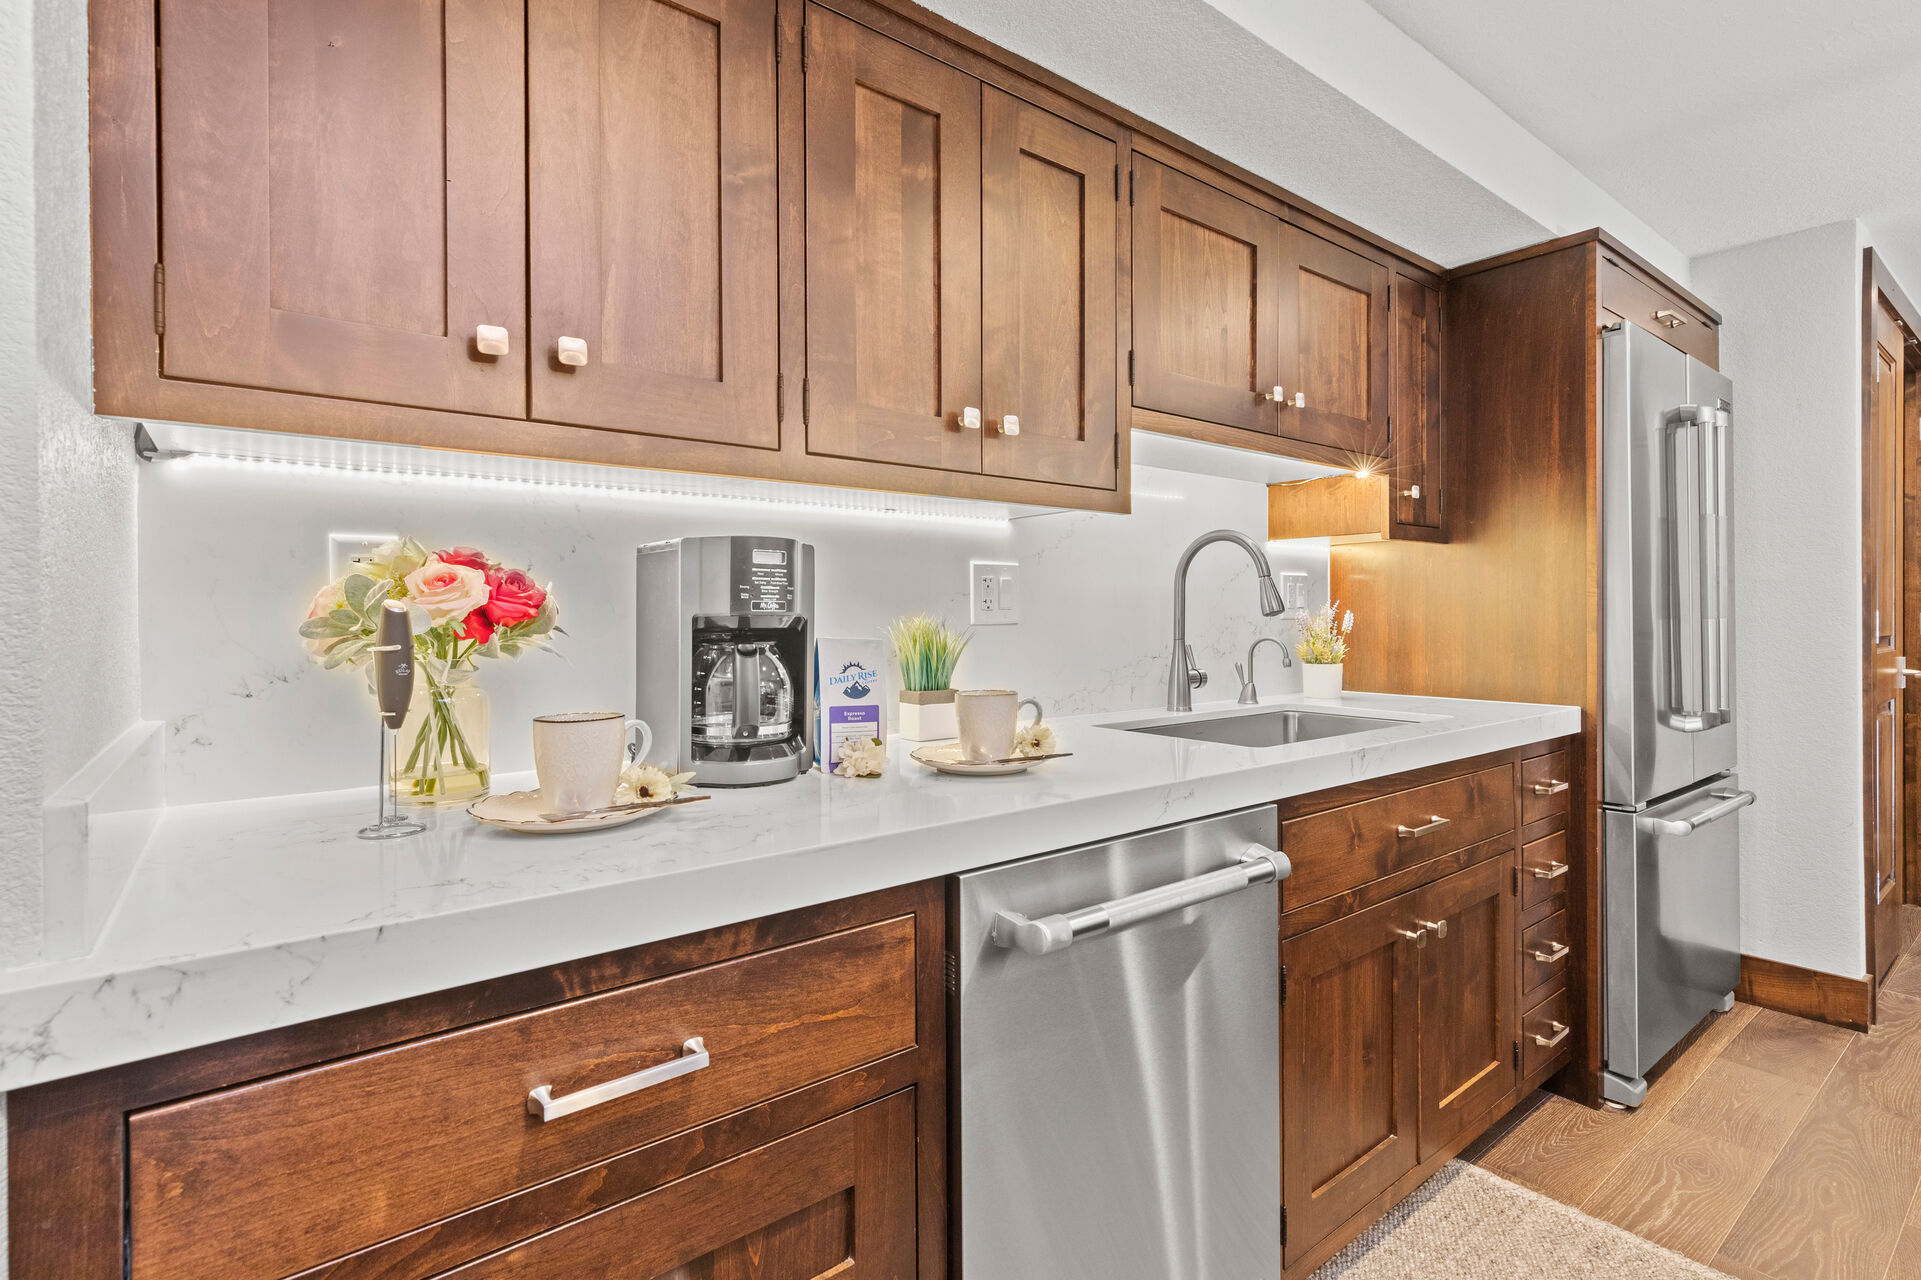 Fully Equipped Kitchen with beautiful stone countertops, stainless steel appliances, and ample space for any and all meal prep.